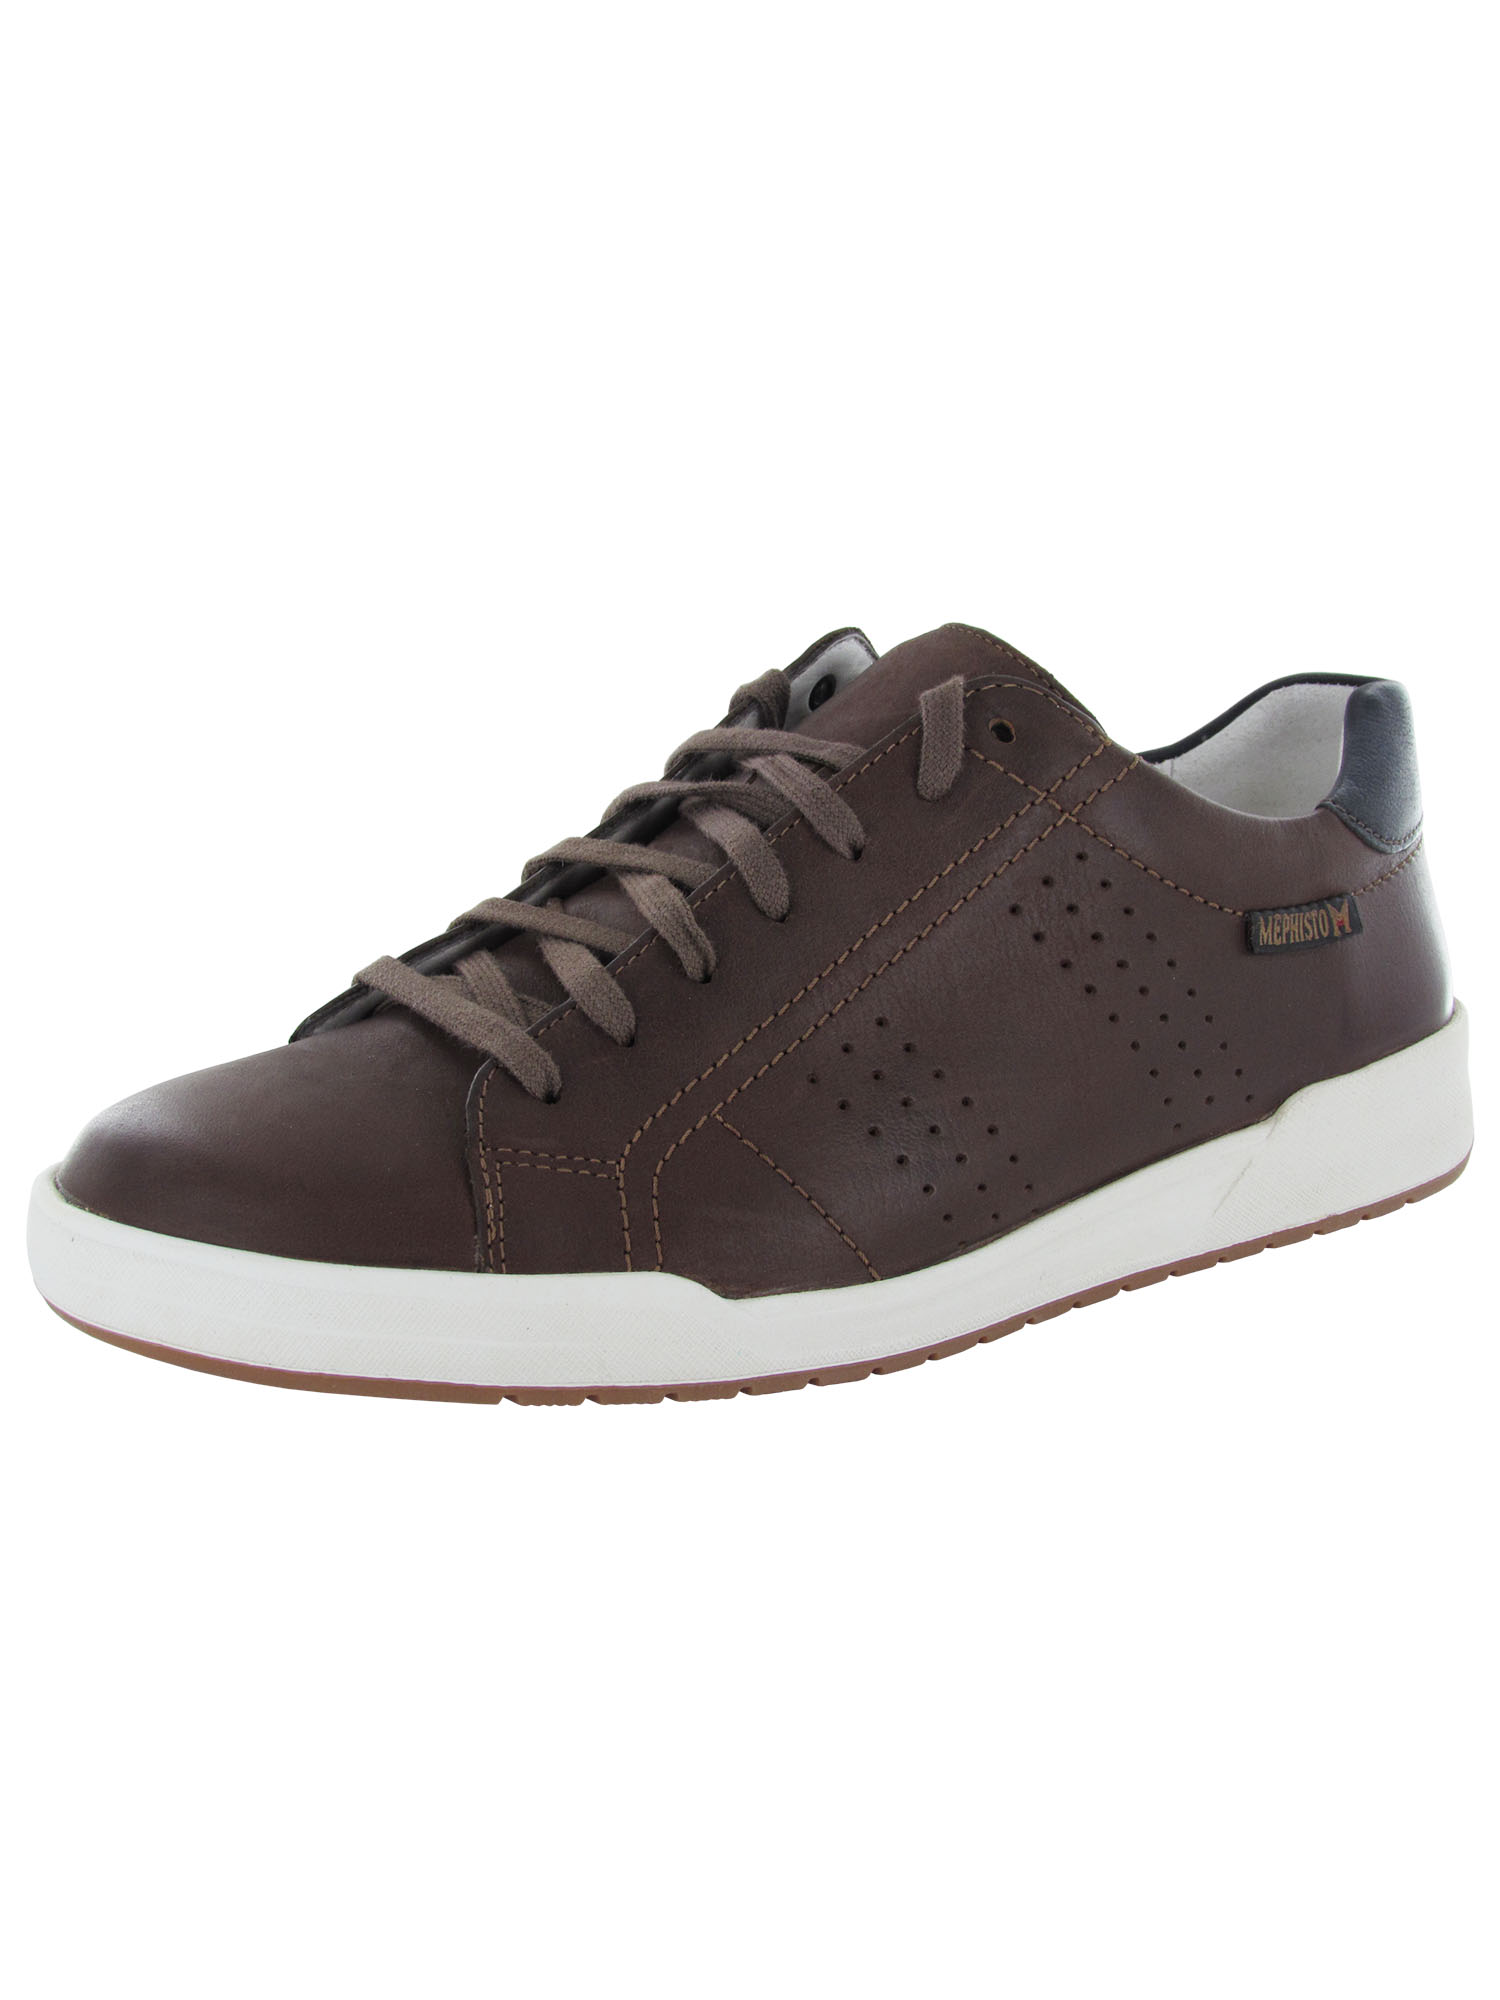 Mephisto Mens 'Rufo' Lace Up Leather Fashion Sneakers